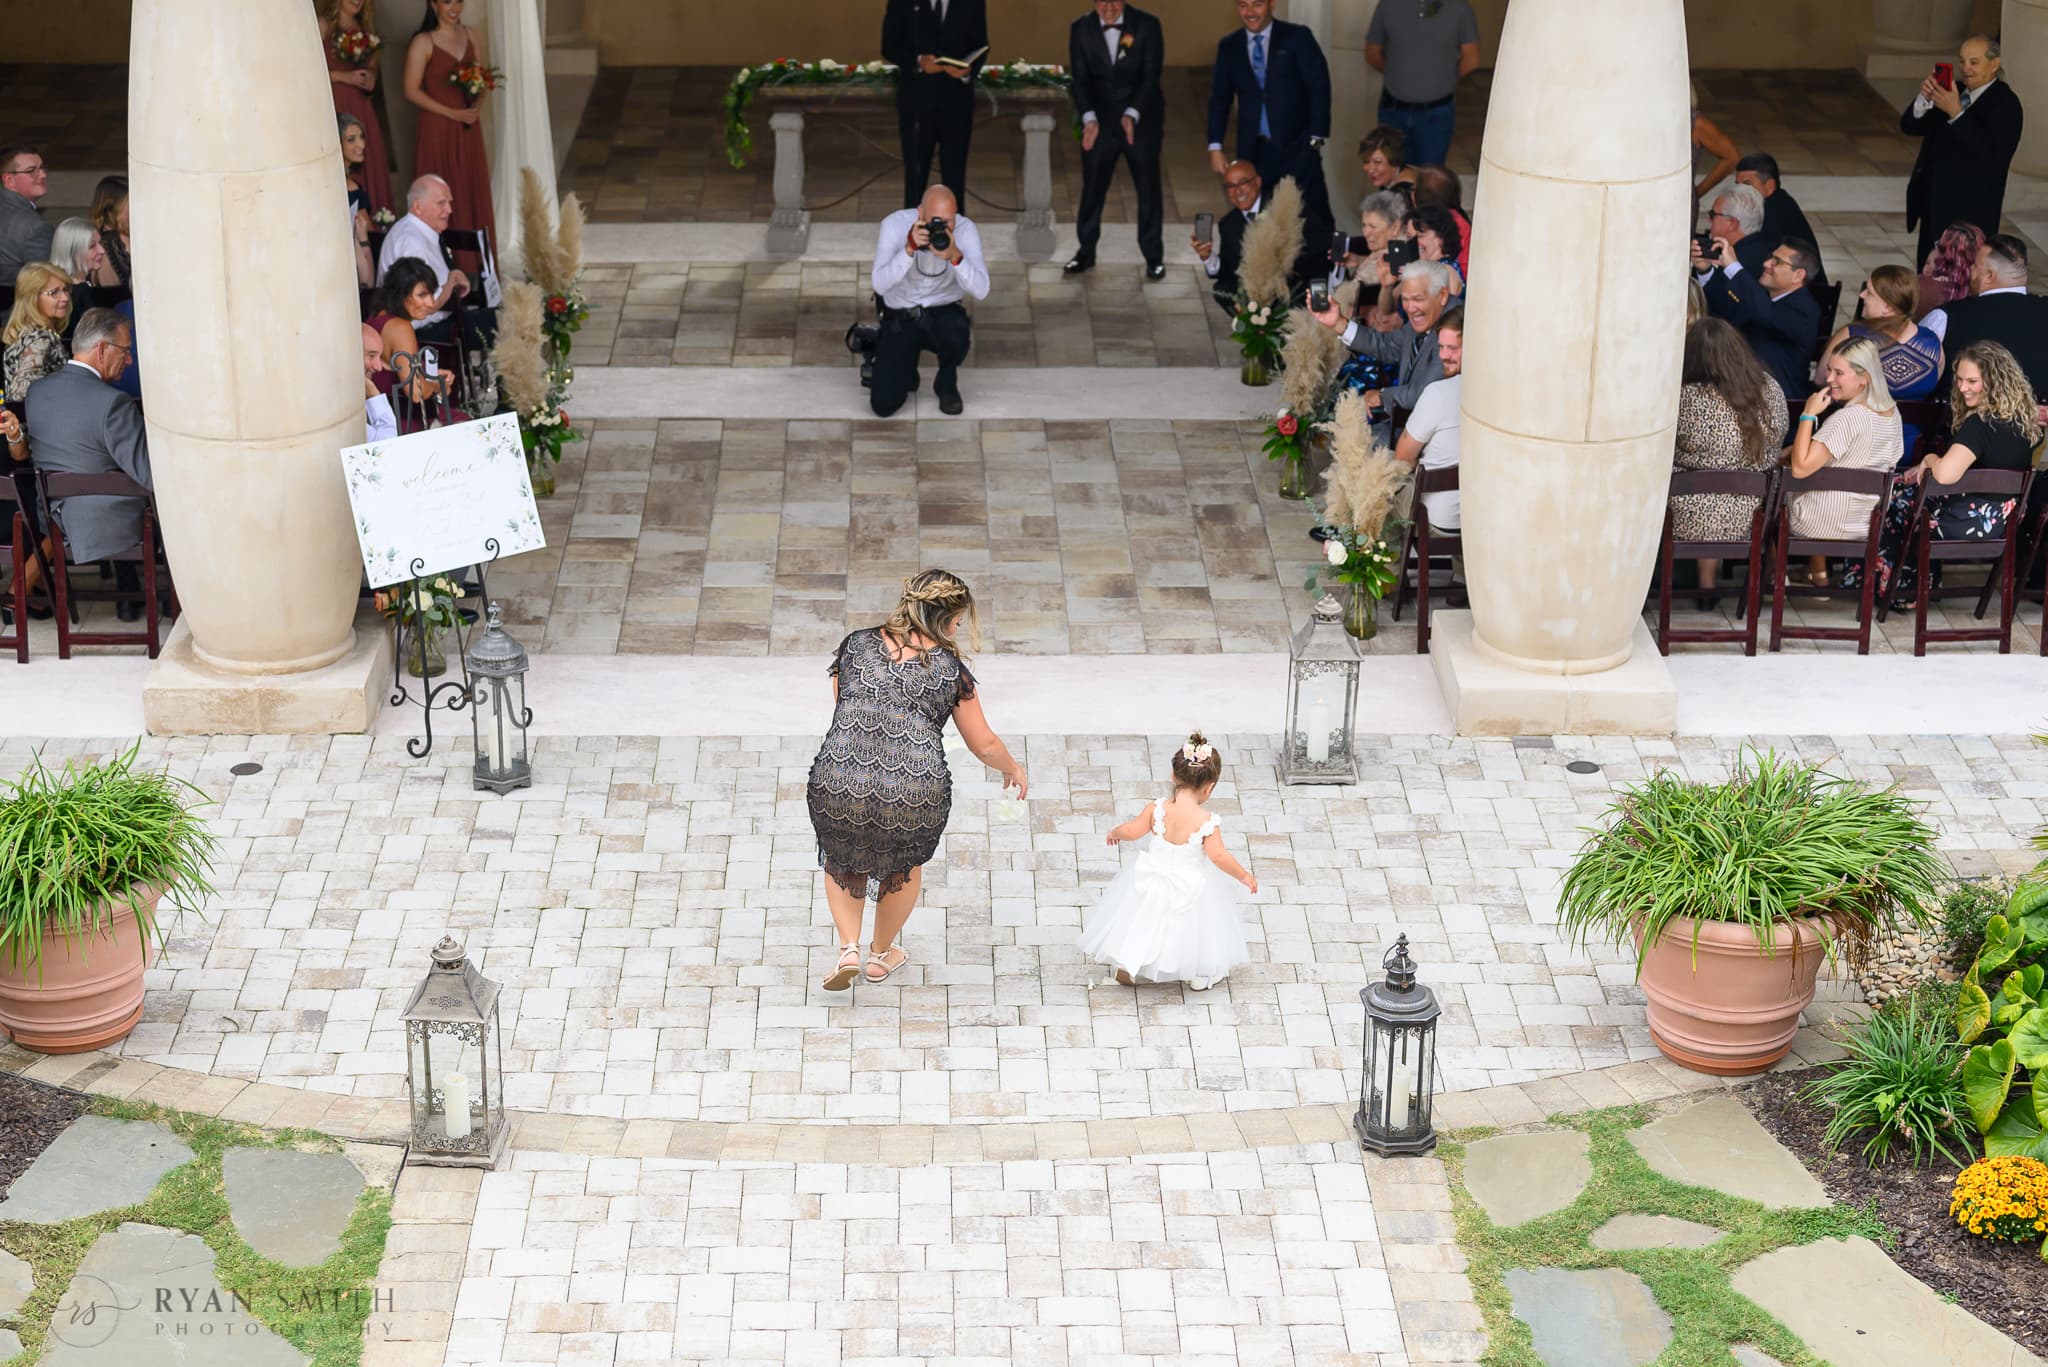 Flower girl couldn't make it down the aisle by herself - 21 Main Events at North Beach